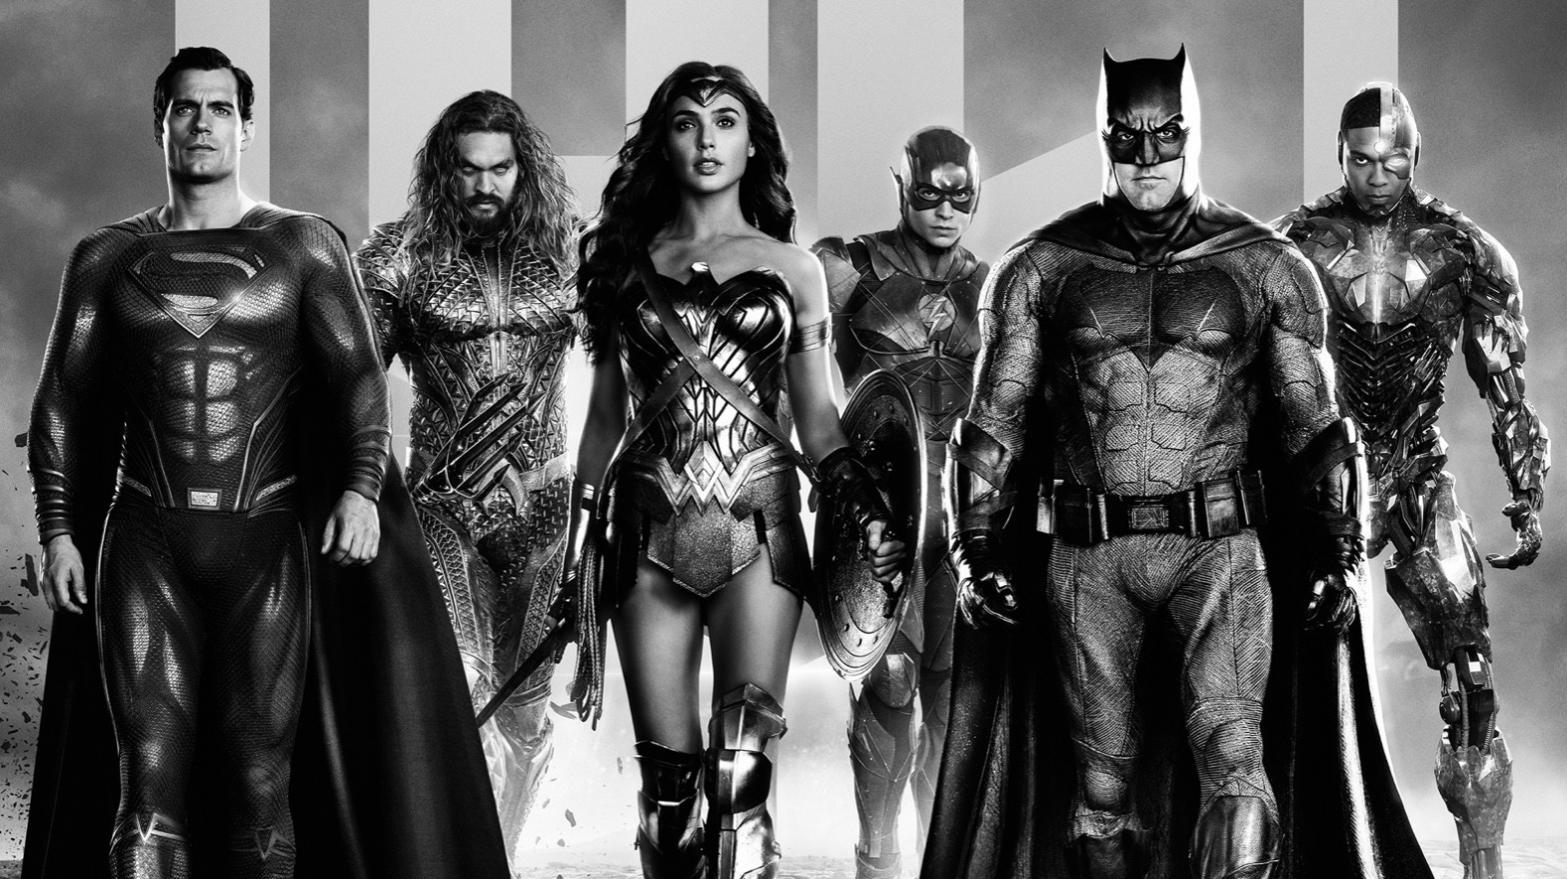 Zack Snyder's Justice League is out March 18. (Photo: Warner Bros.)